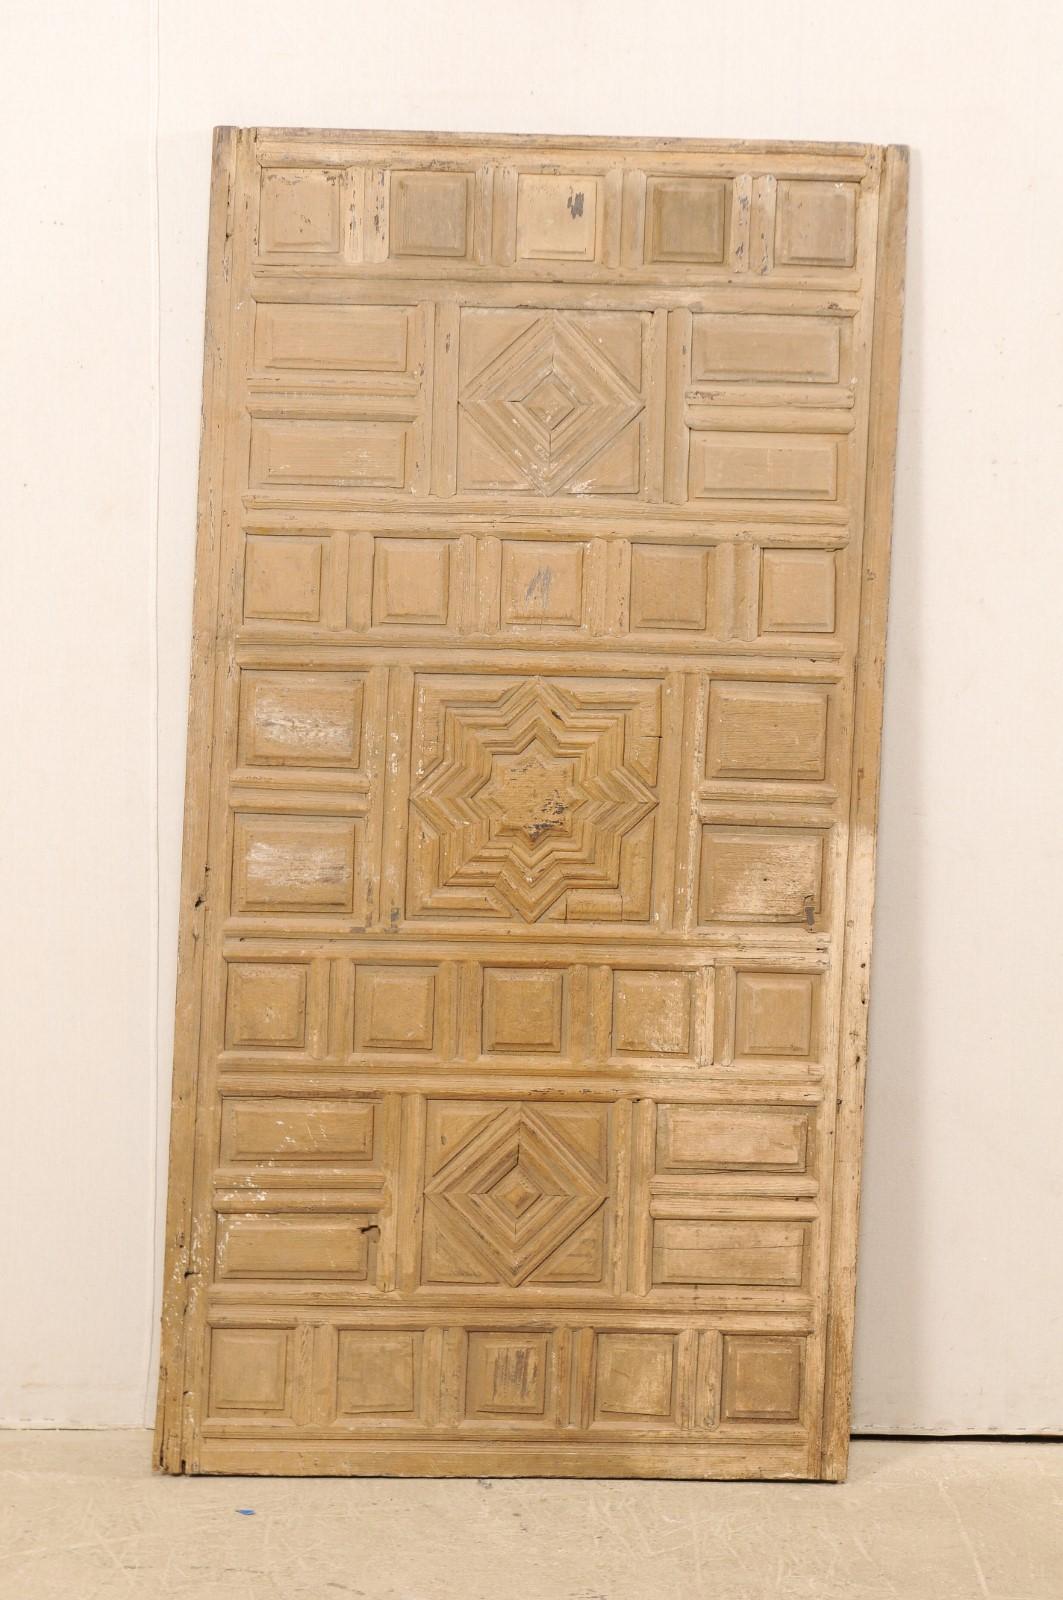 A single Spanish carved-wood wall panel from the early 19th century. This antique wall decoration from Spain features a raised panel front comprised of varying geometric shapes, with a Moorish influence star at center. There is a nicely aged patina